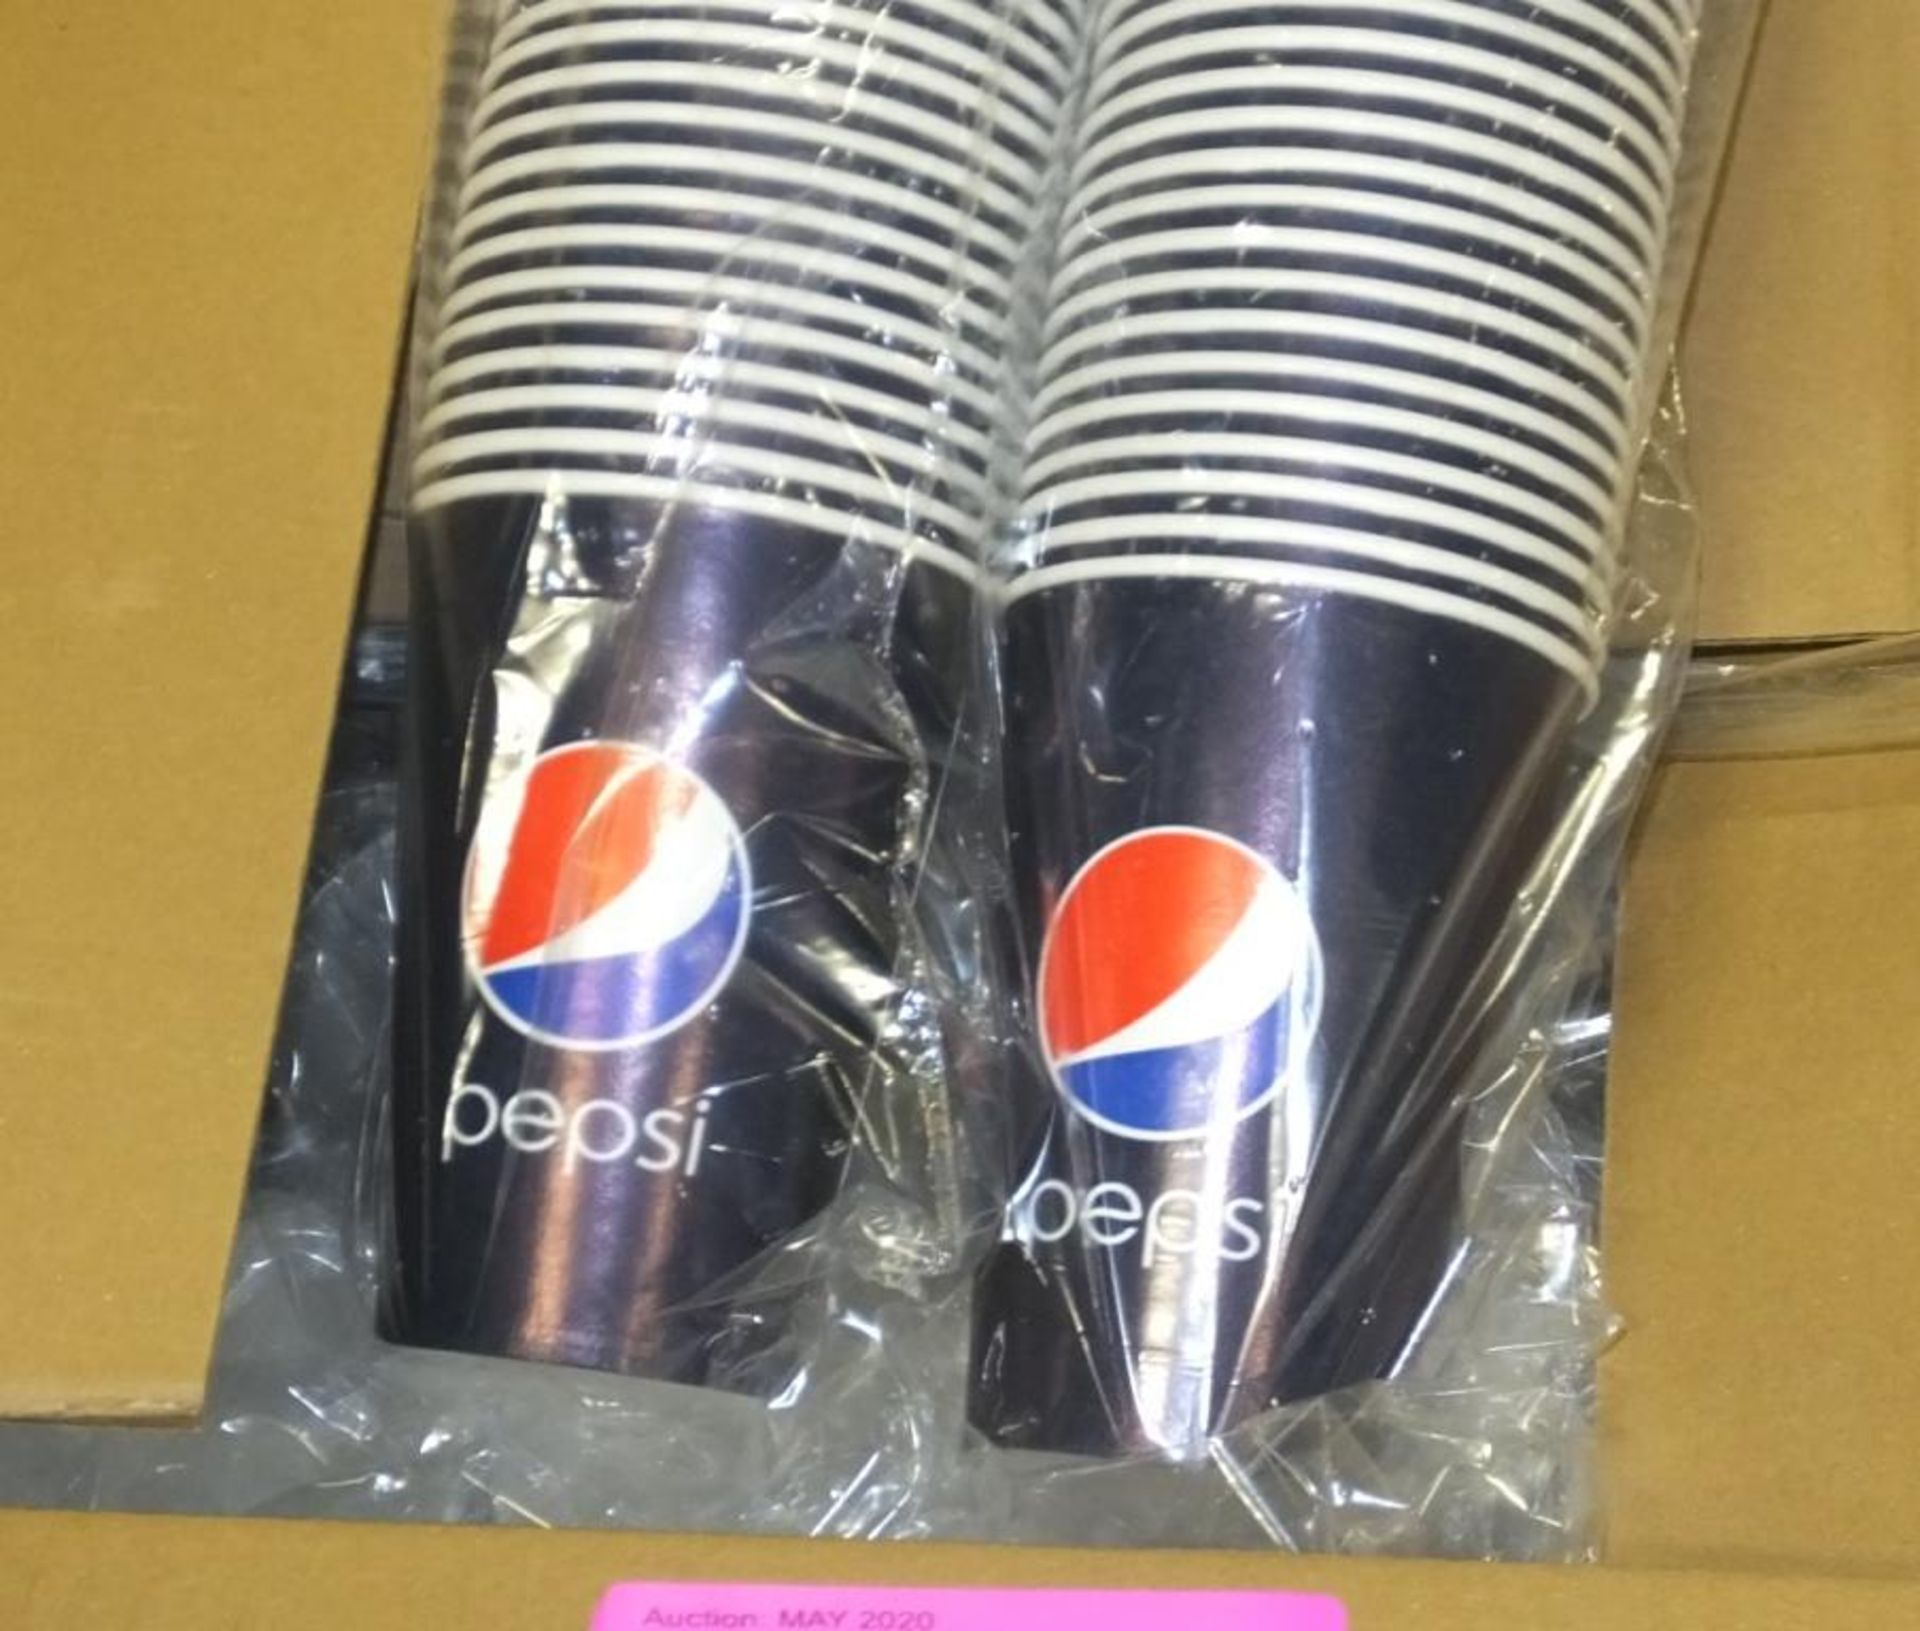 2x Boxes of Pepsi paper cups - Image 2 of 2